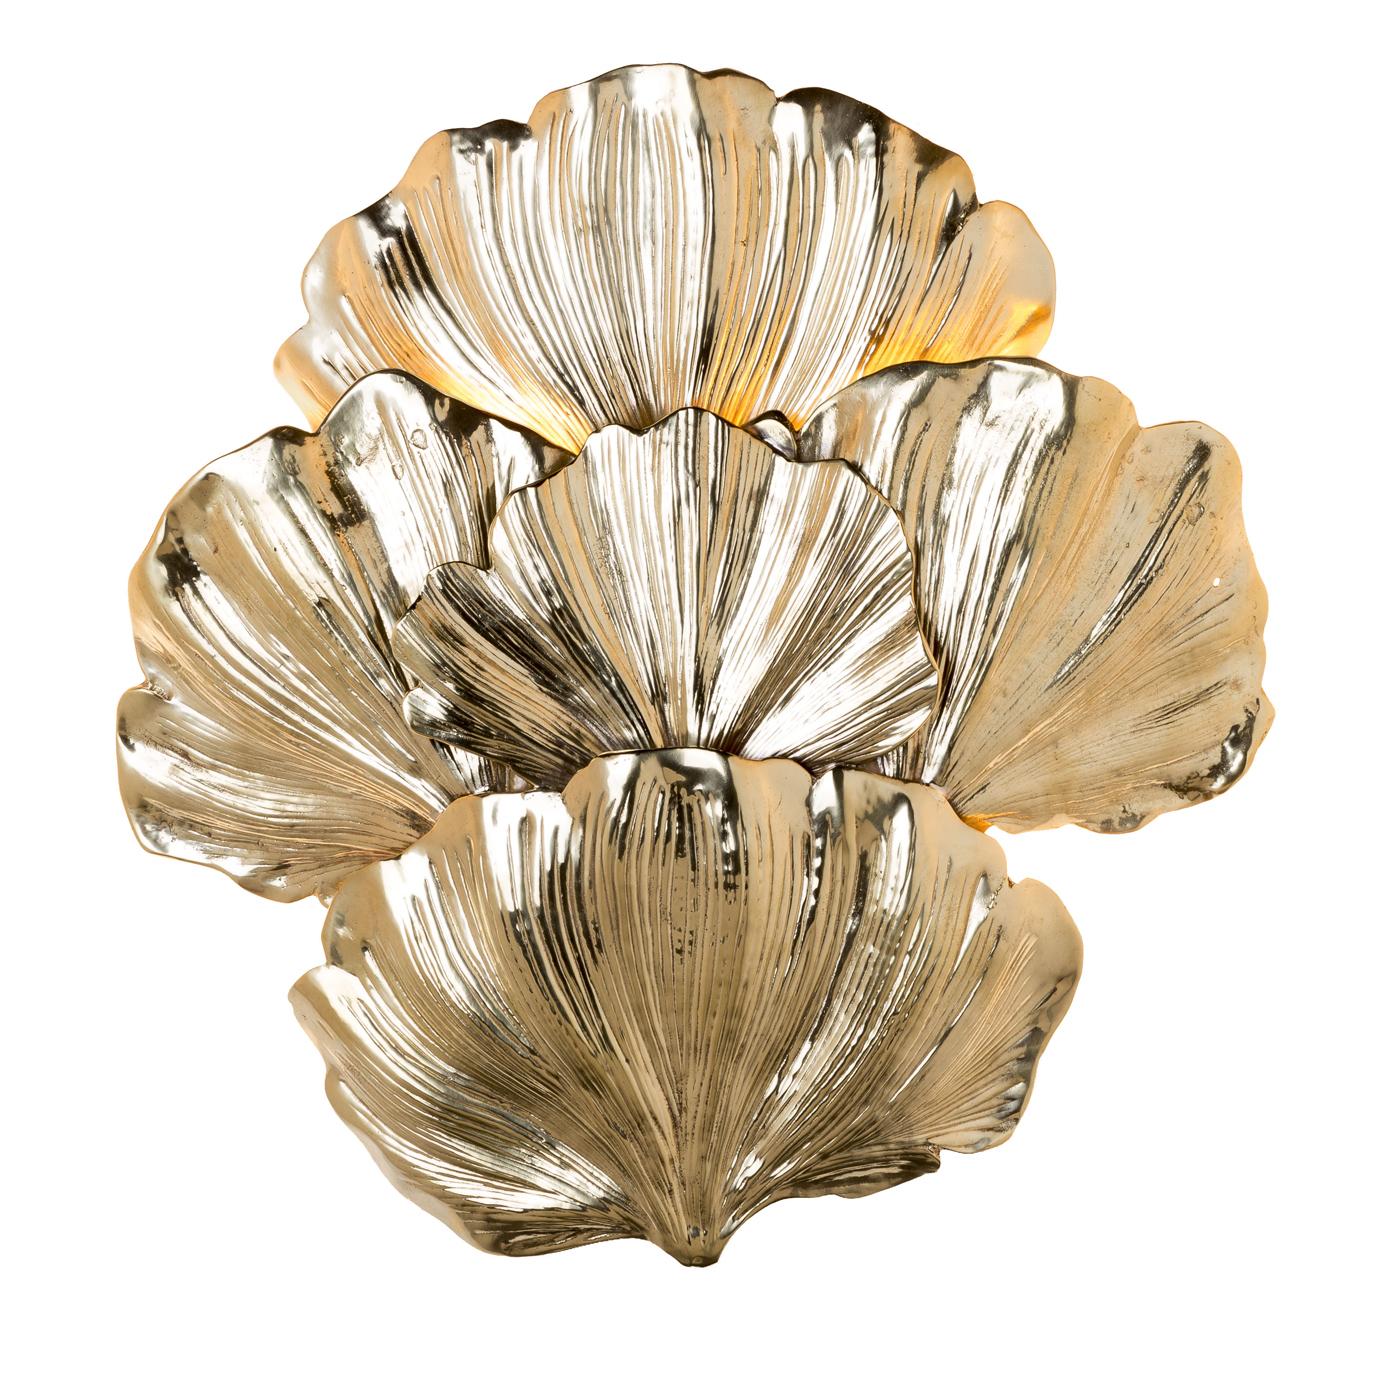 This small sconce is made entirely in brass and artfully renders the shape and texture of five gingko biloba leaves. Part of the series that celebrates this natural element, this piece can be paired with other objects from the same collection, or